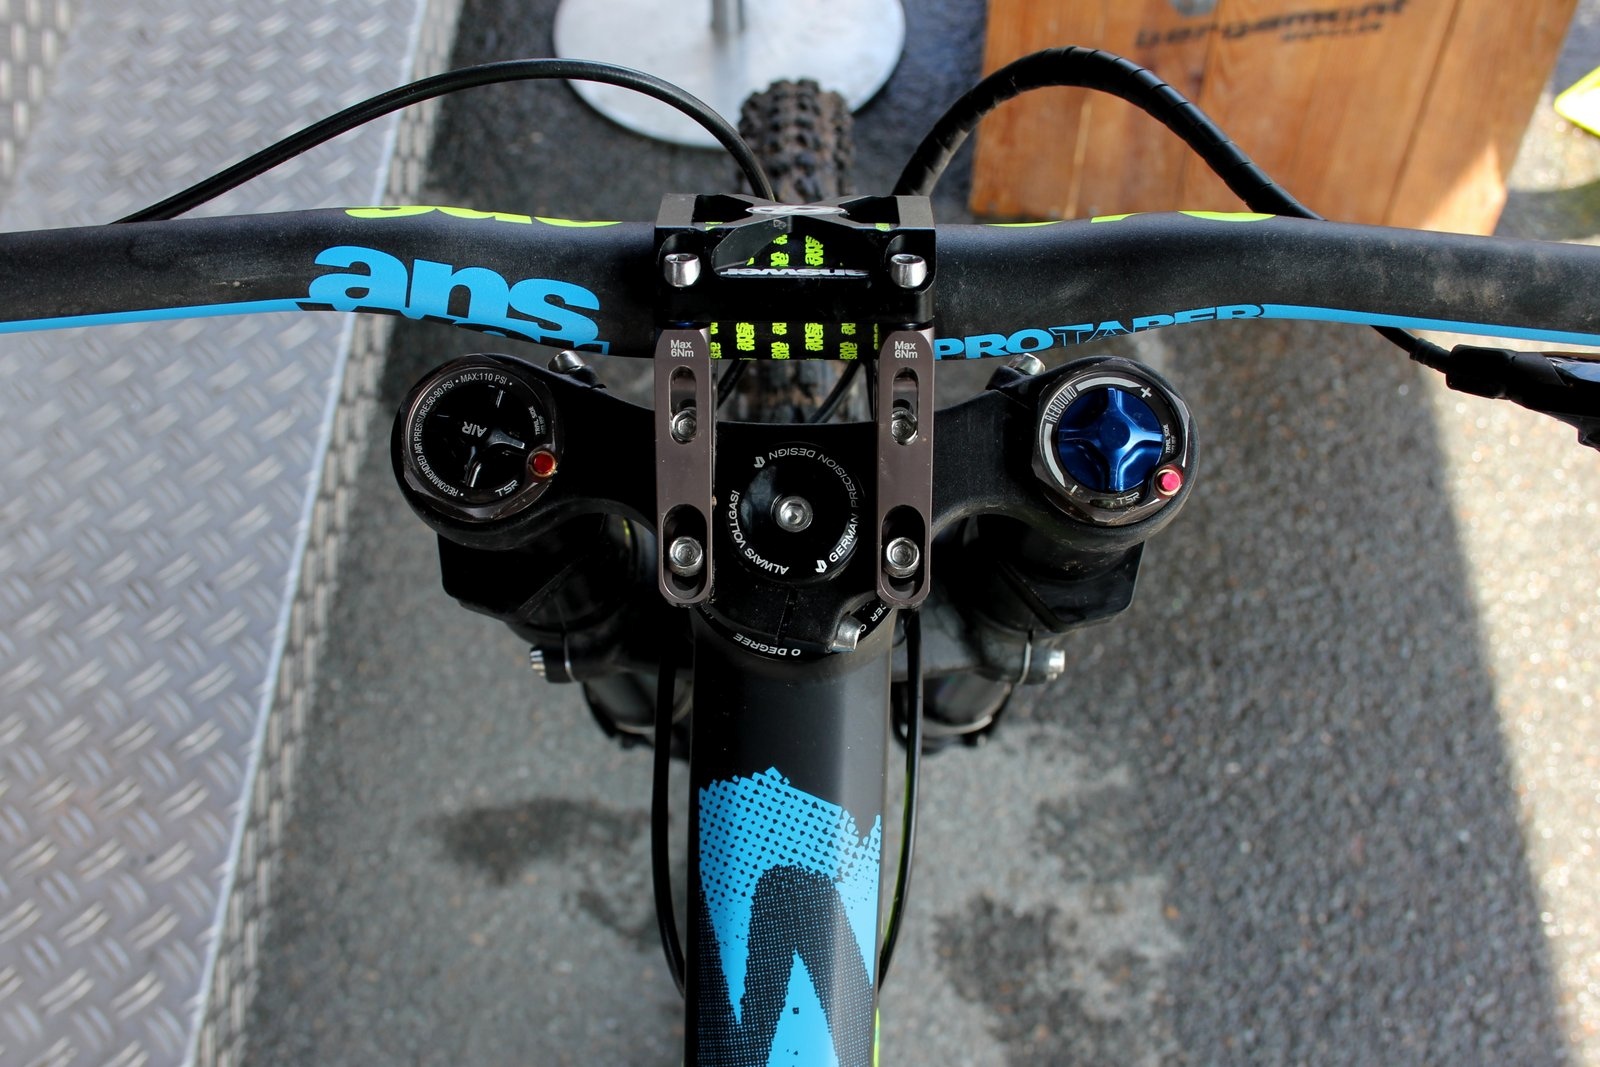 Answers direct mount stem gives riders even more tuning options between 45, 50 or 55mm length.